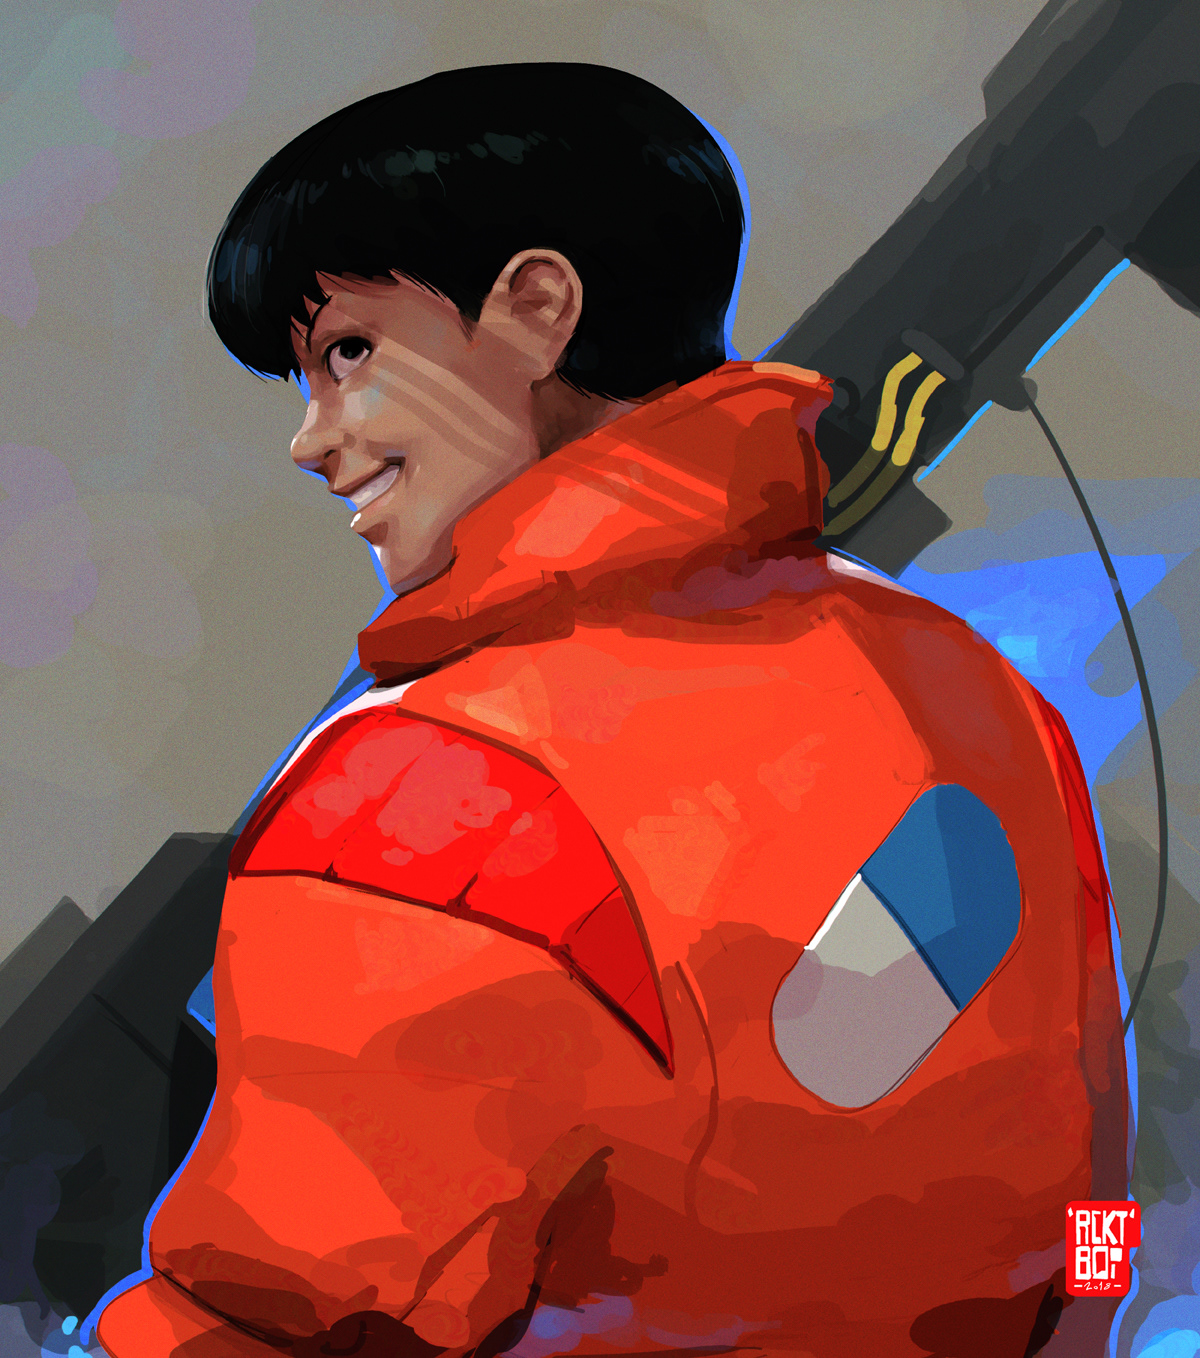 Constantly watch the film and find new inspiration. #akira30 #akira #kaneda...